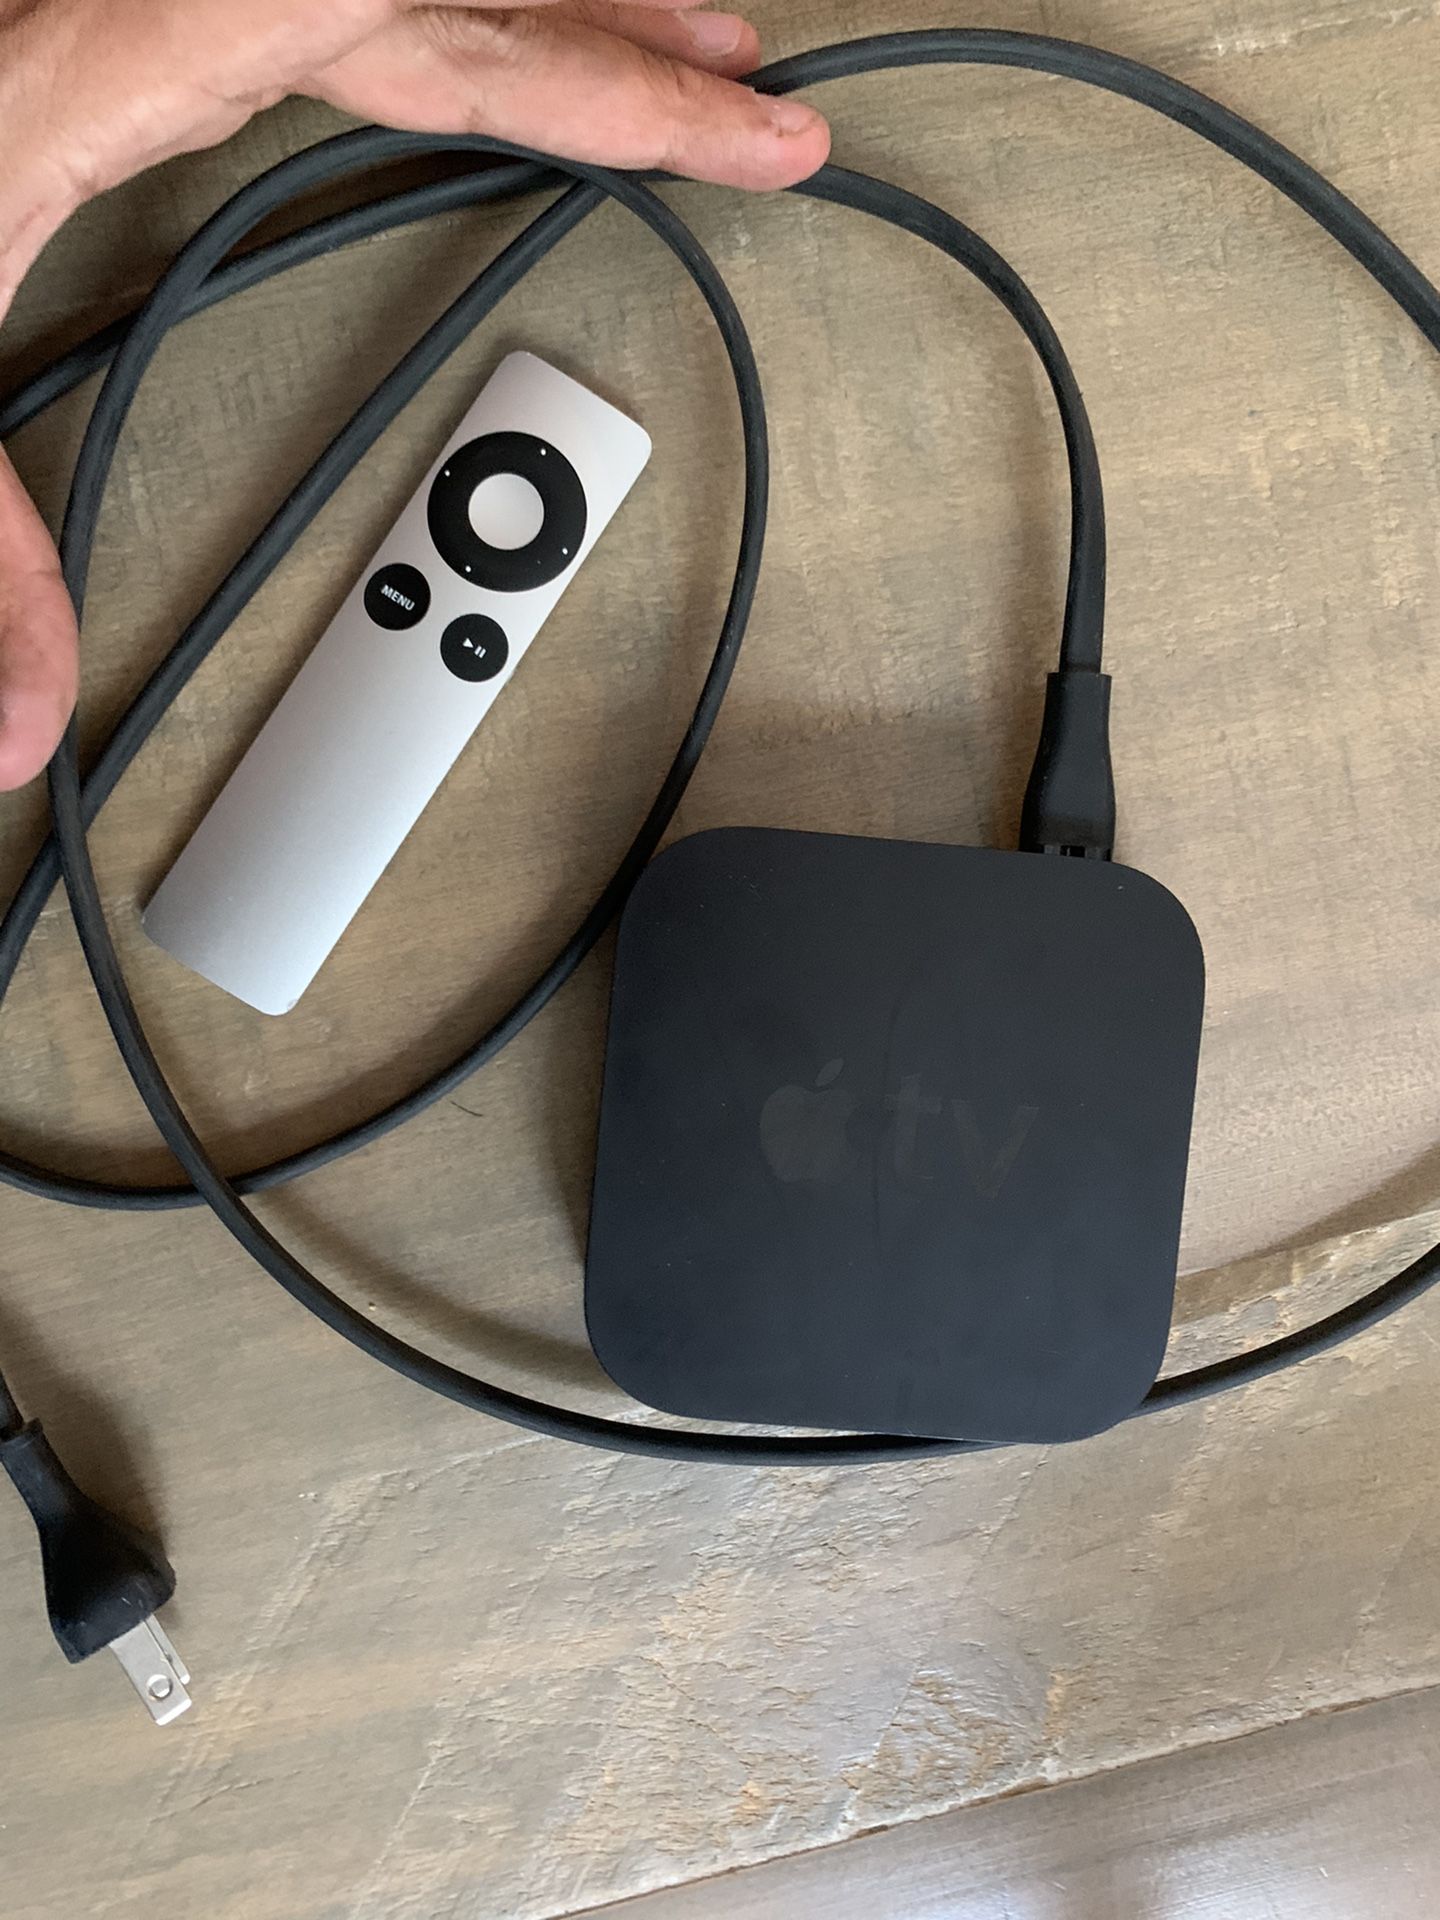 Apple TV. Great working condition.